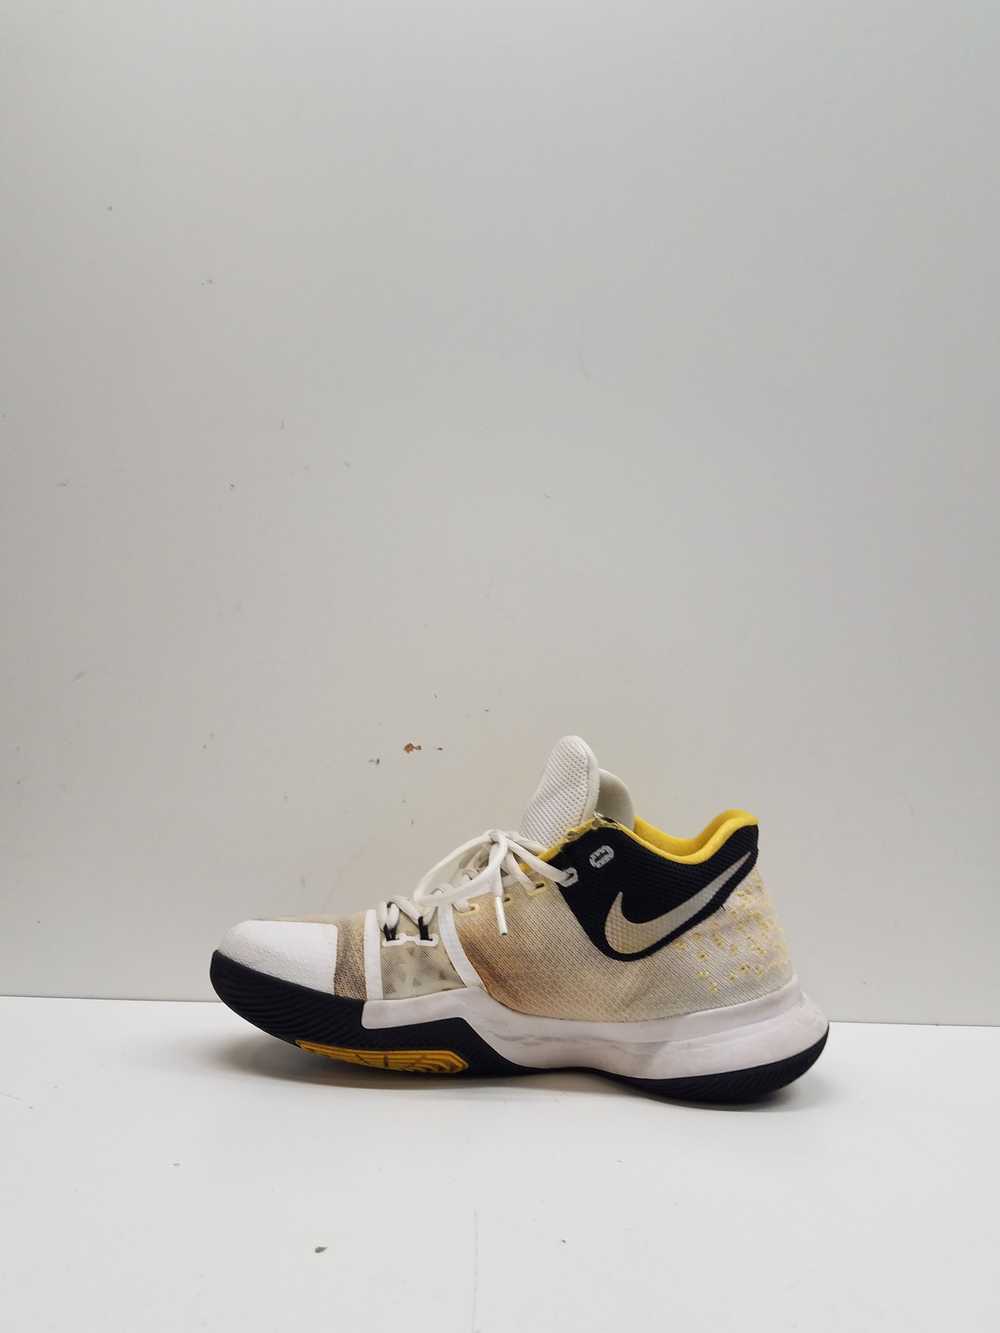 Nike Kyrie Basketball Shoes Men's - image 2